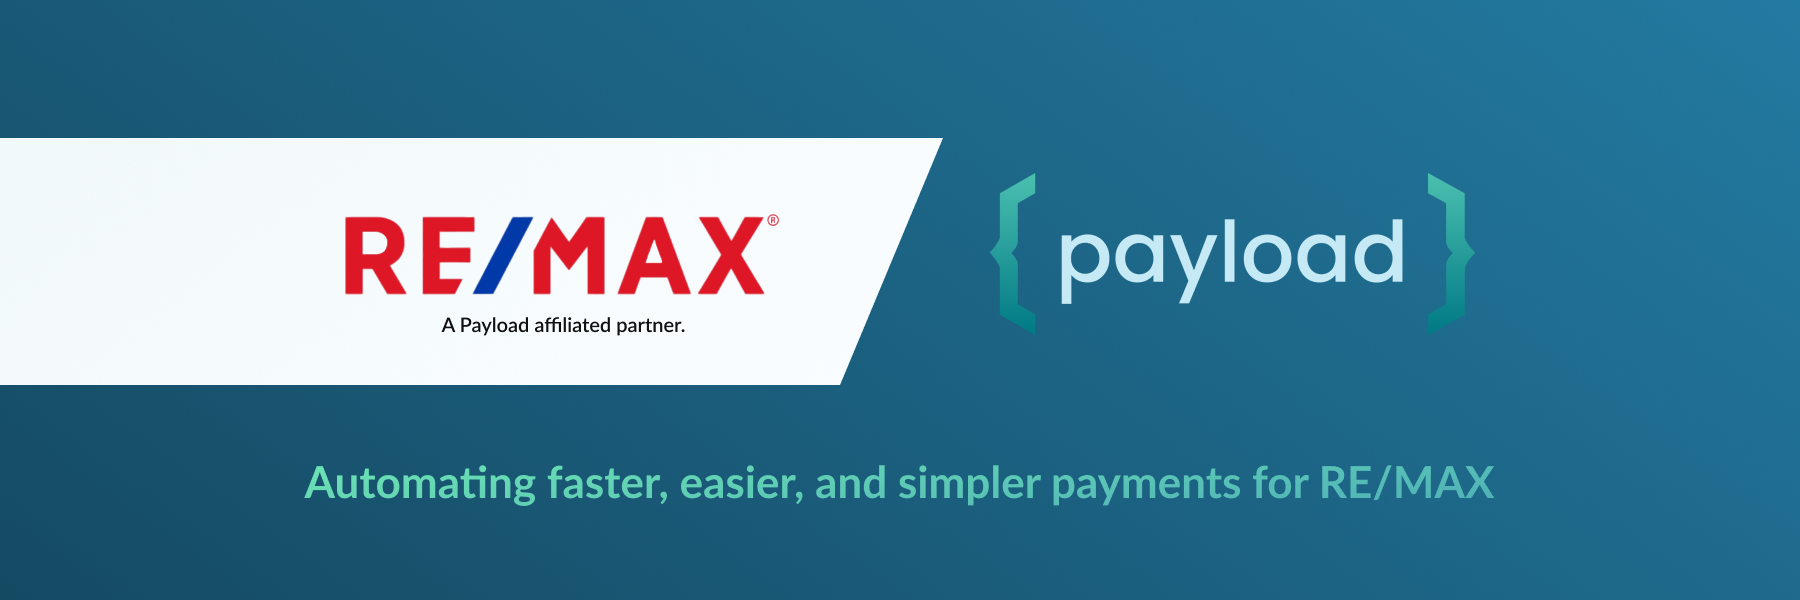 REMAX: A Payload affiliated partner